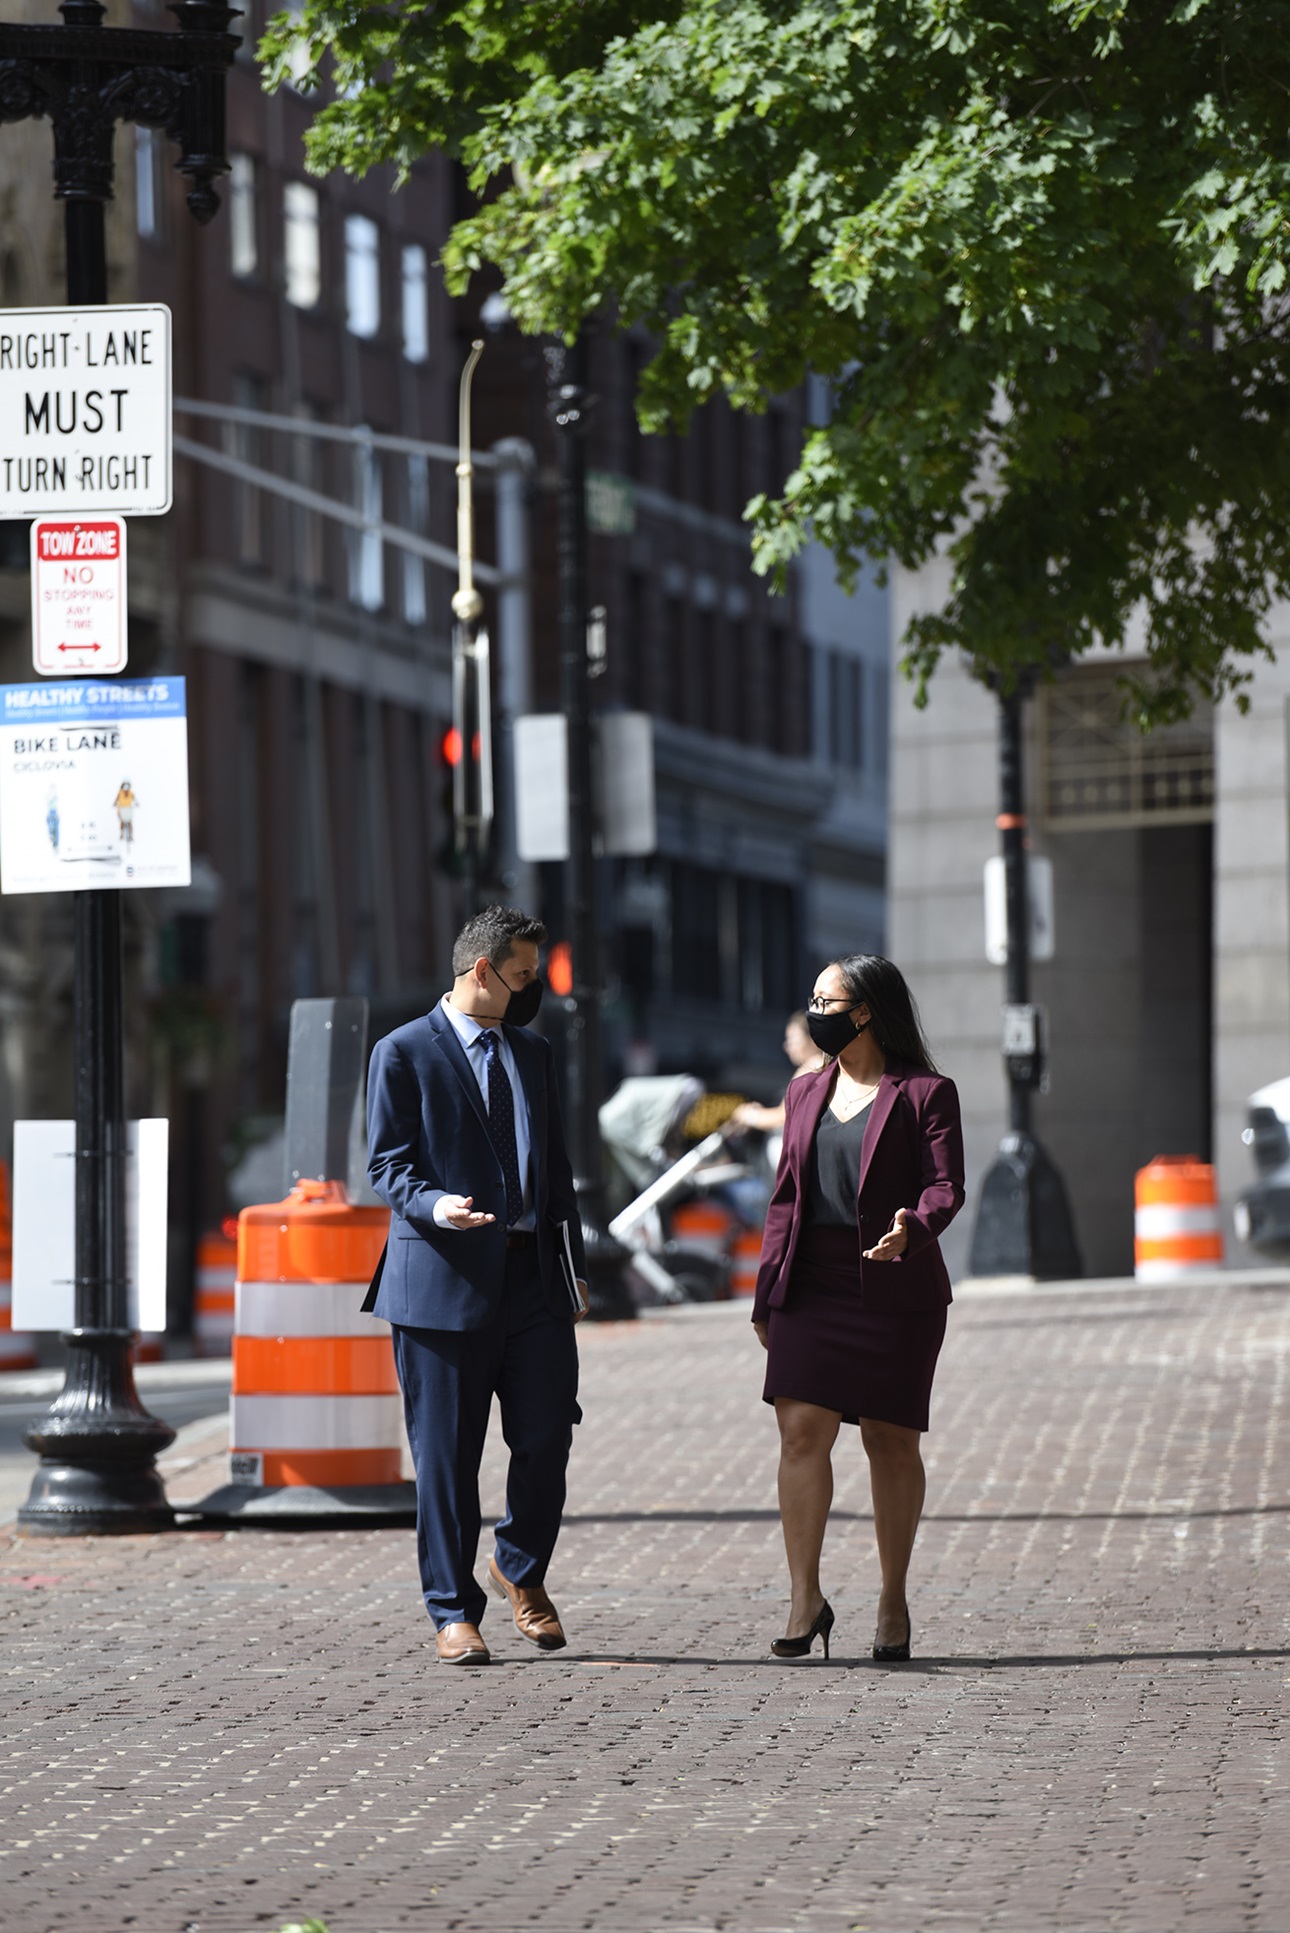 Ivan Espinoza Madrigal and Sophia Hall walking next to each other on a brick sidewalk in the city. They are both wearing masks. He's wearing a dark blue suit and she's wearing a dark purple suit jacket and skirt. They're walking towards the camera and facing each other, gesturing as if having a conversation.